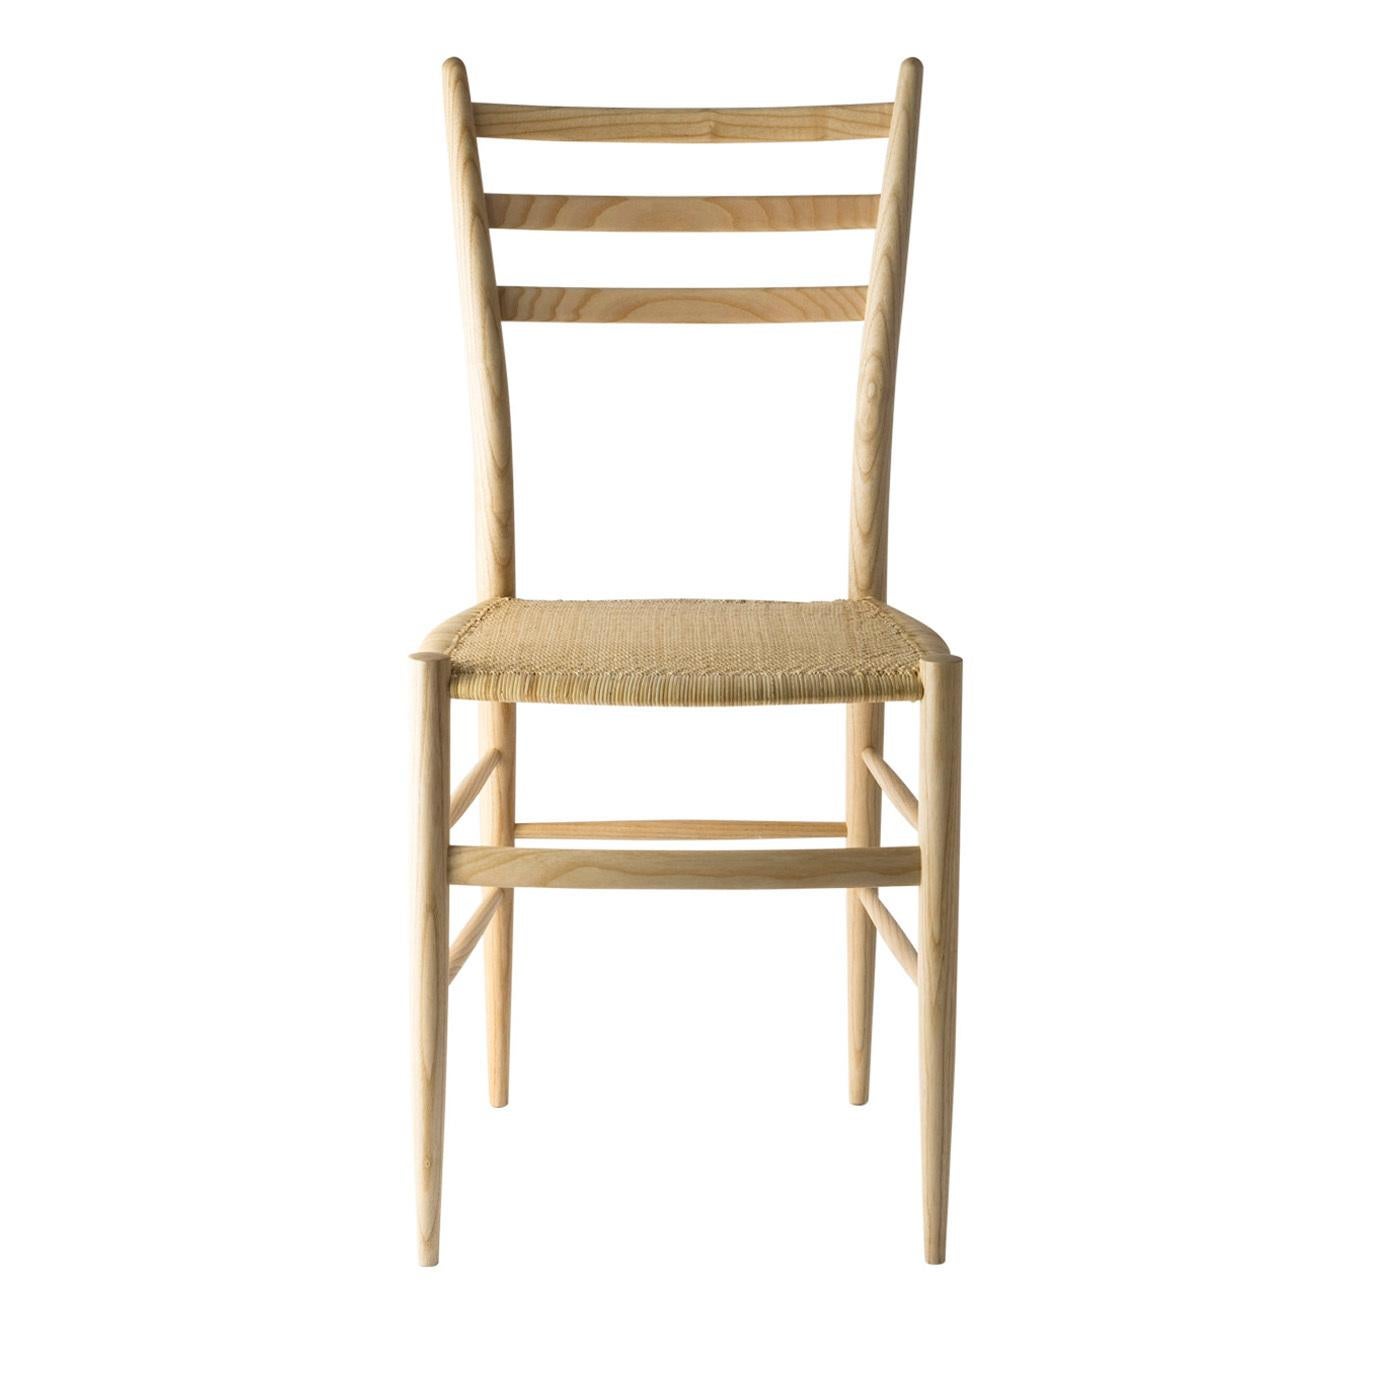 Comfortable and robust chair in three charming color combinations of ash wood, delicately crafted in the traditional Chiavari design. This piece of furniture is particularly suited for the kitchen and dining room.